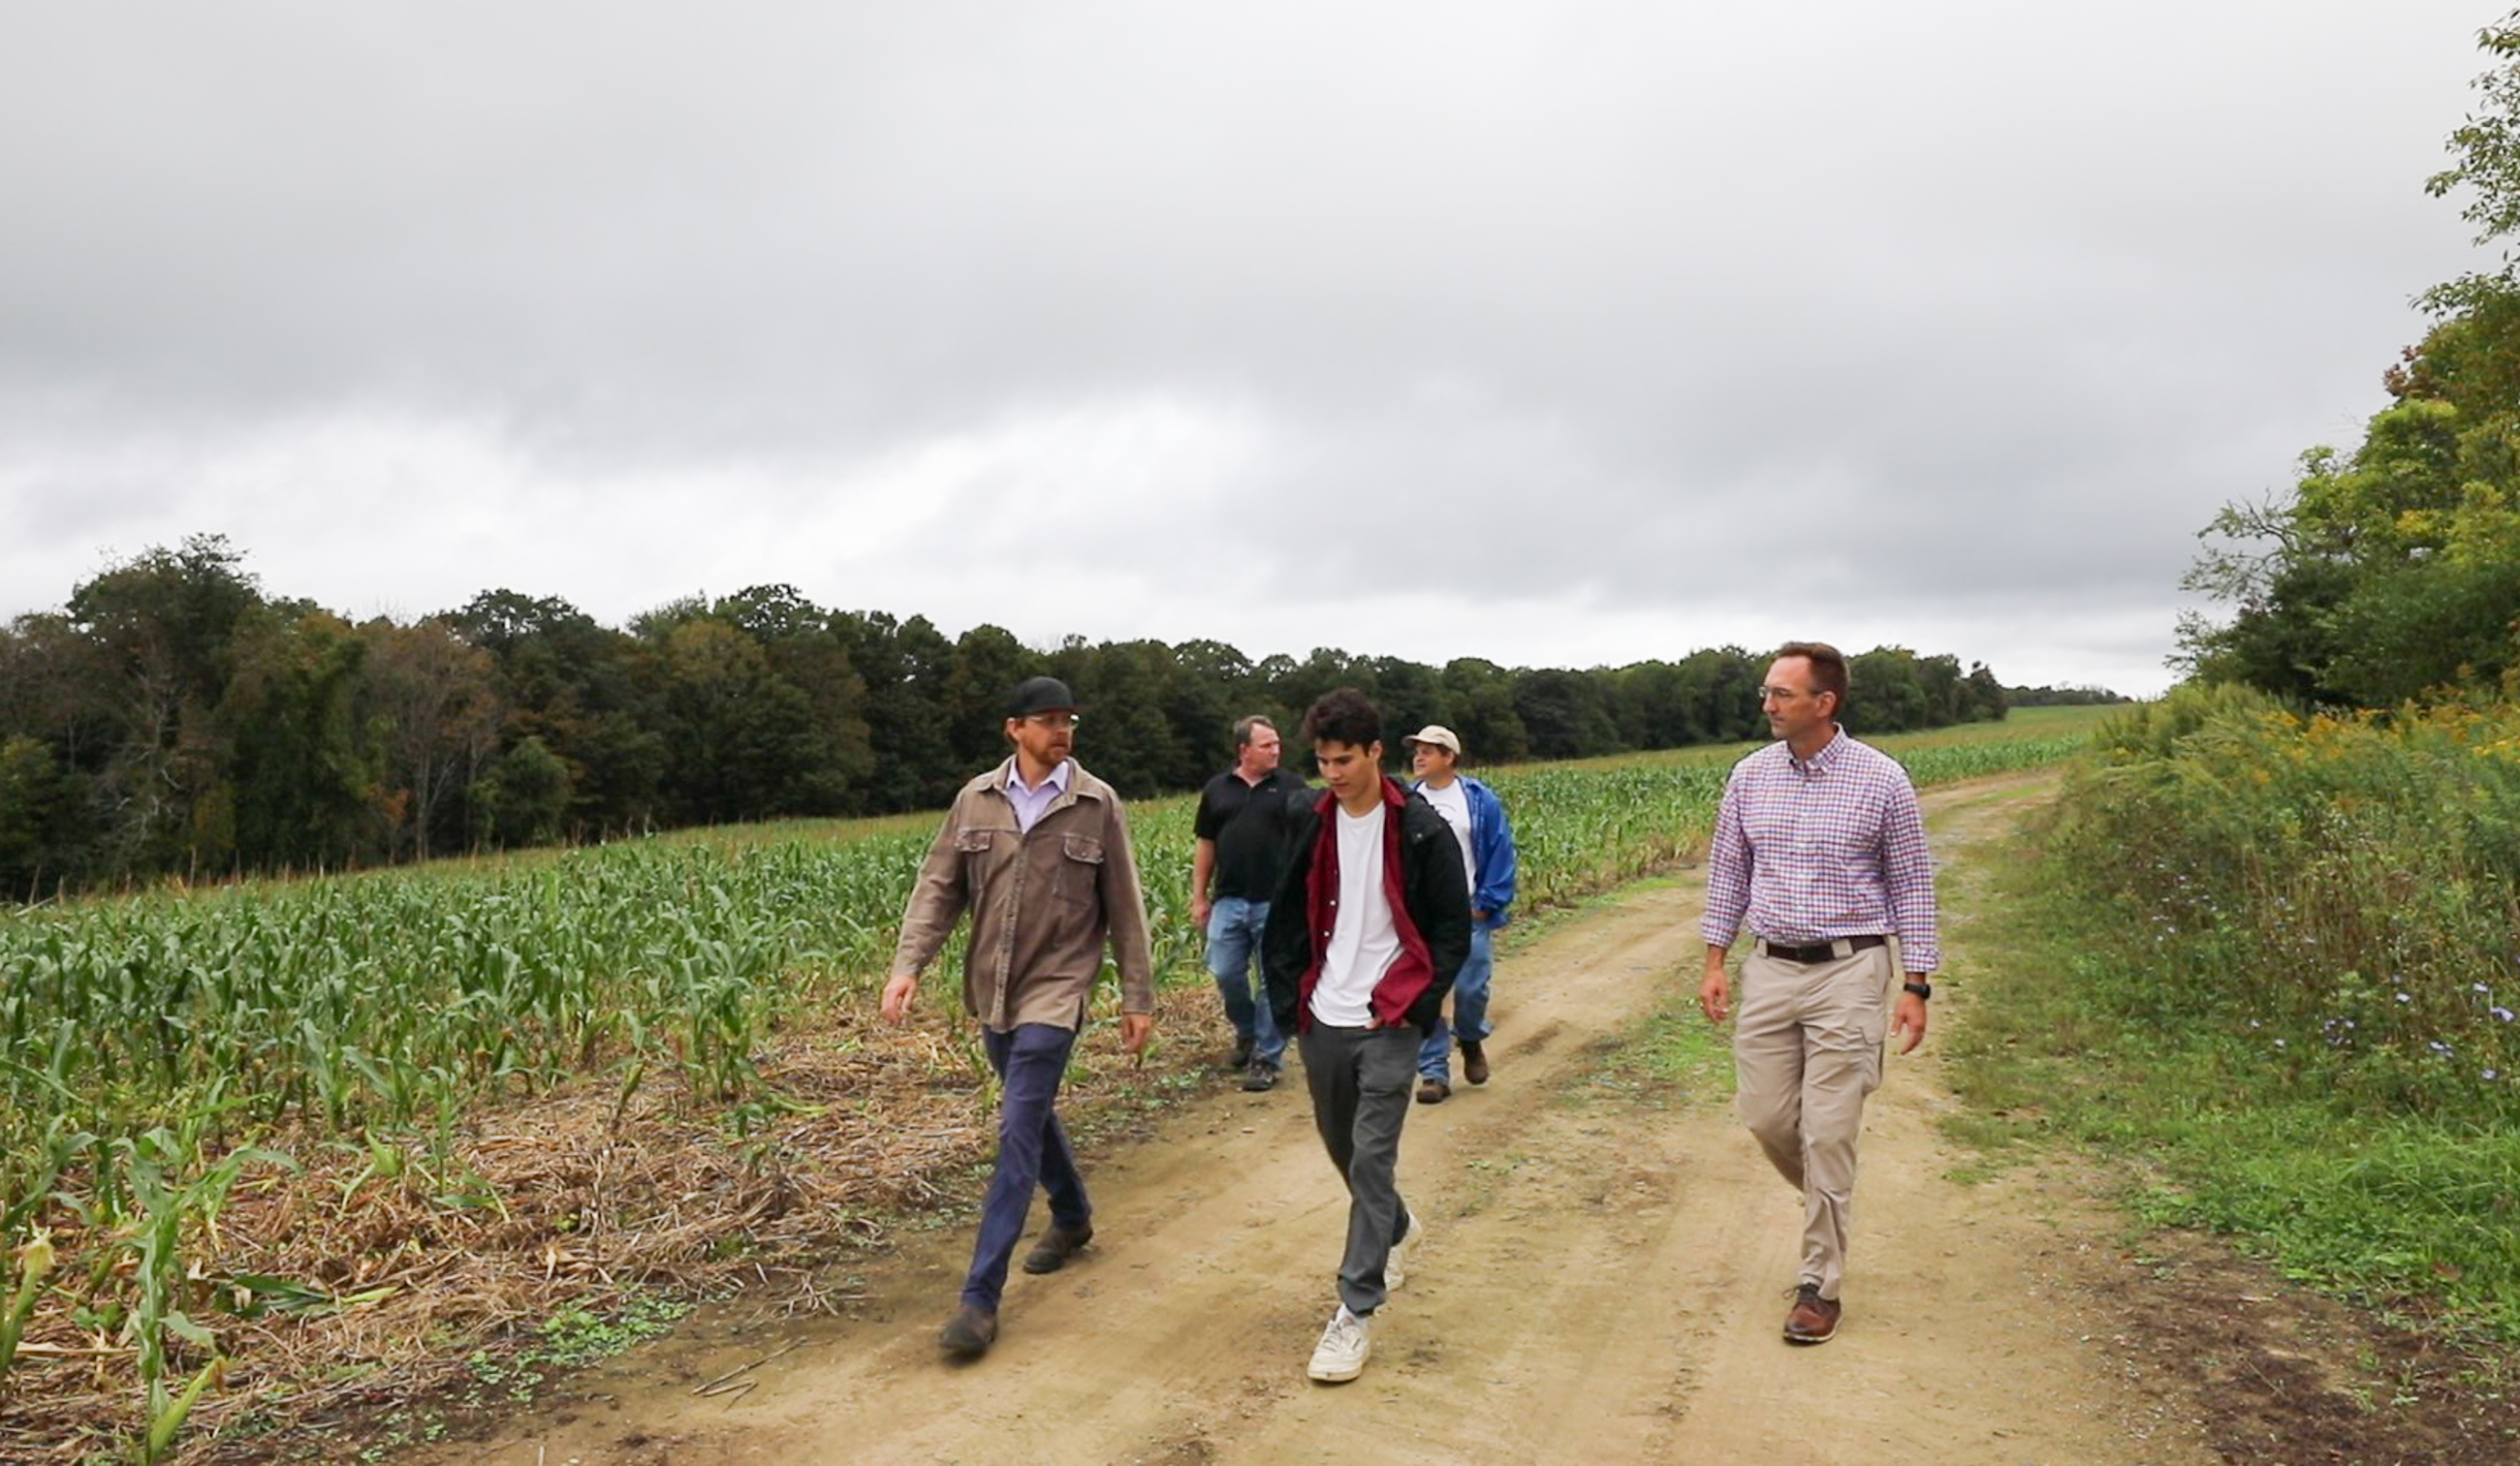 Members of the team who helped to conserve a parcel of land walk along a dirt road through a corn field located on that land. 